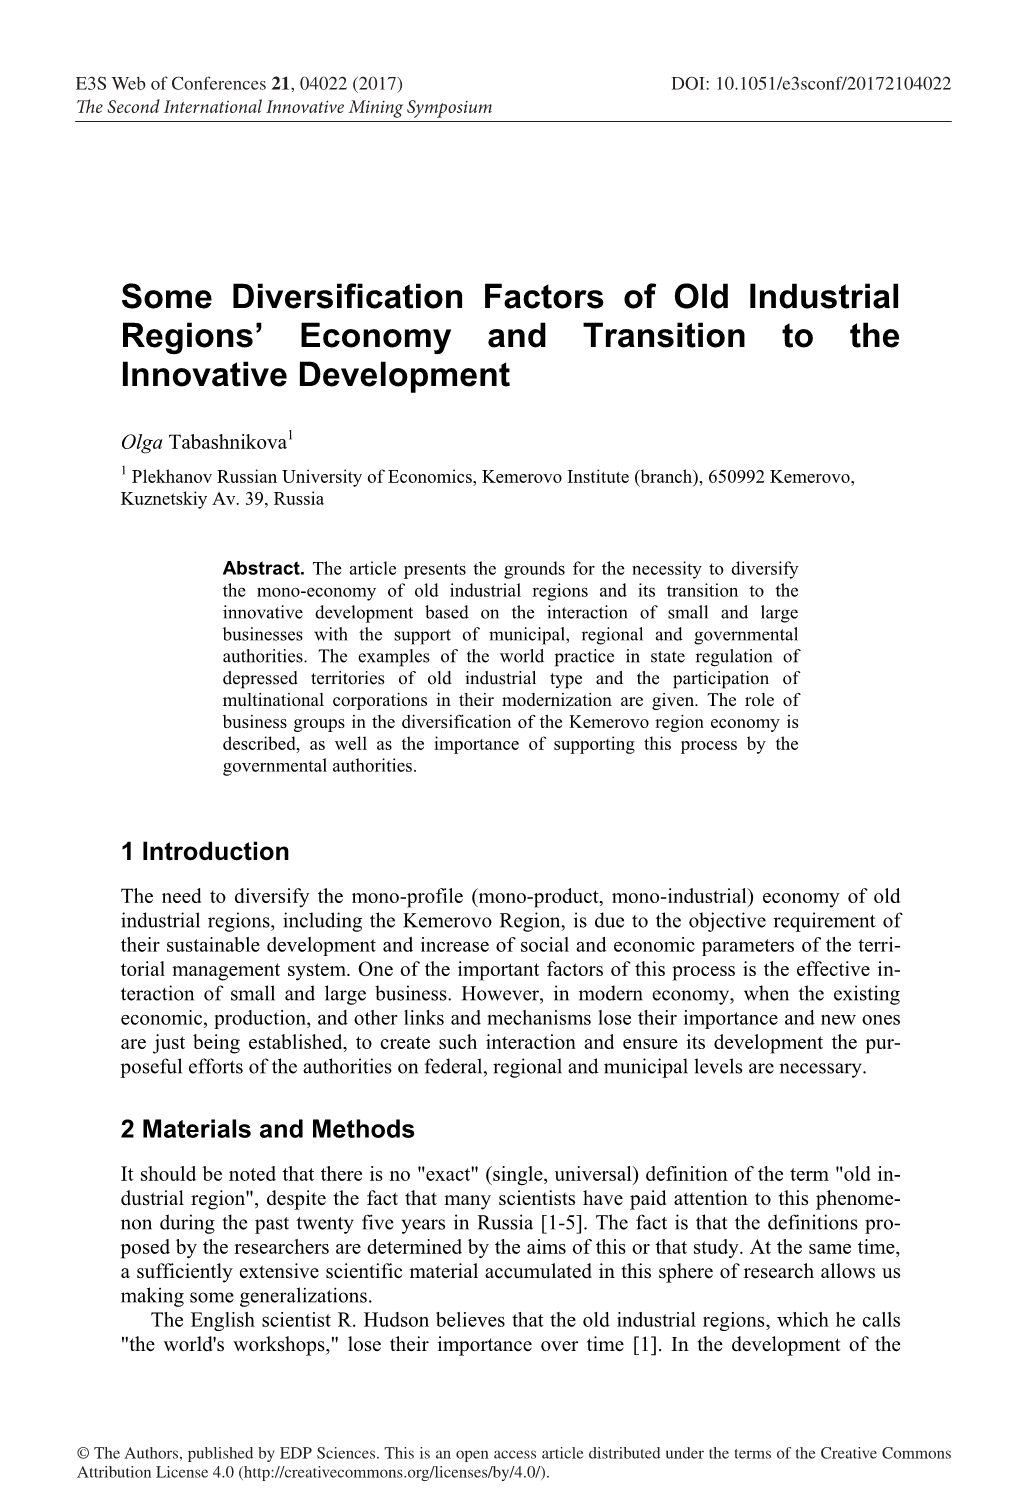 Some Diversification Factors of Old Industrial Regions\' Economy and Transition to the Innovative Development